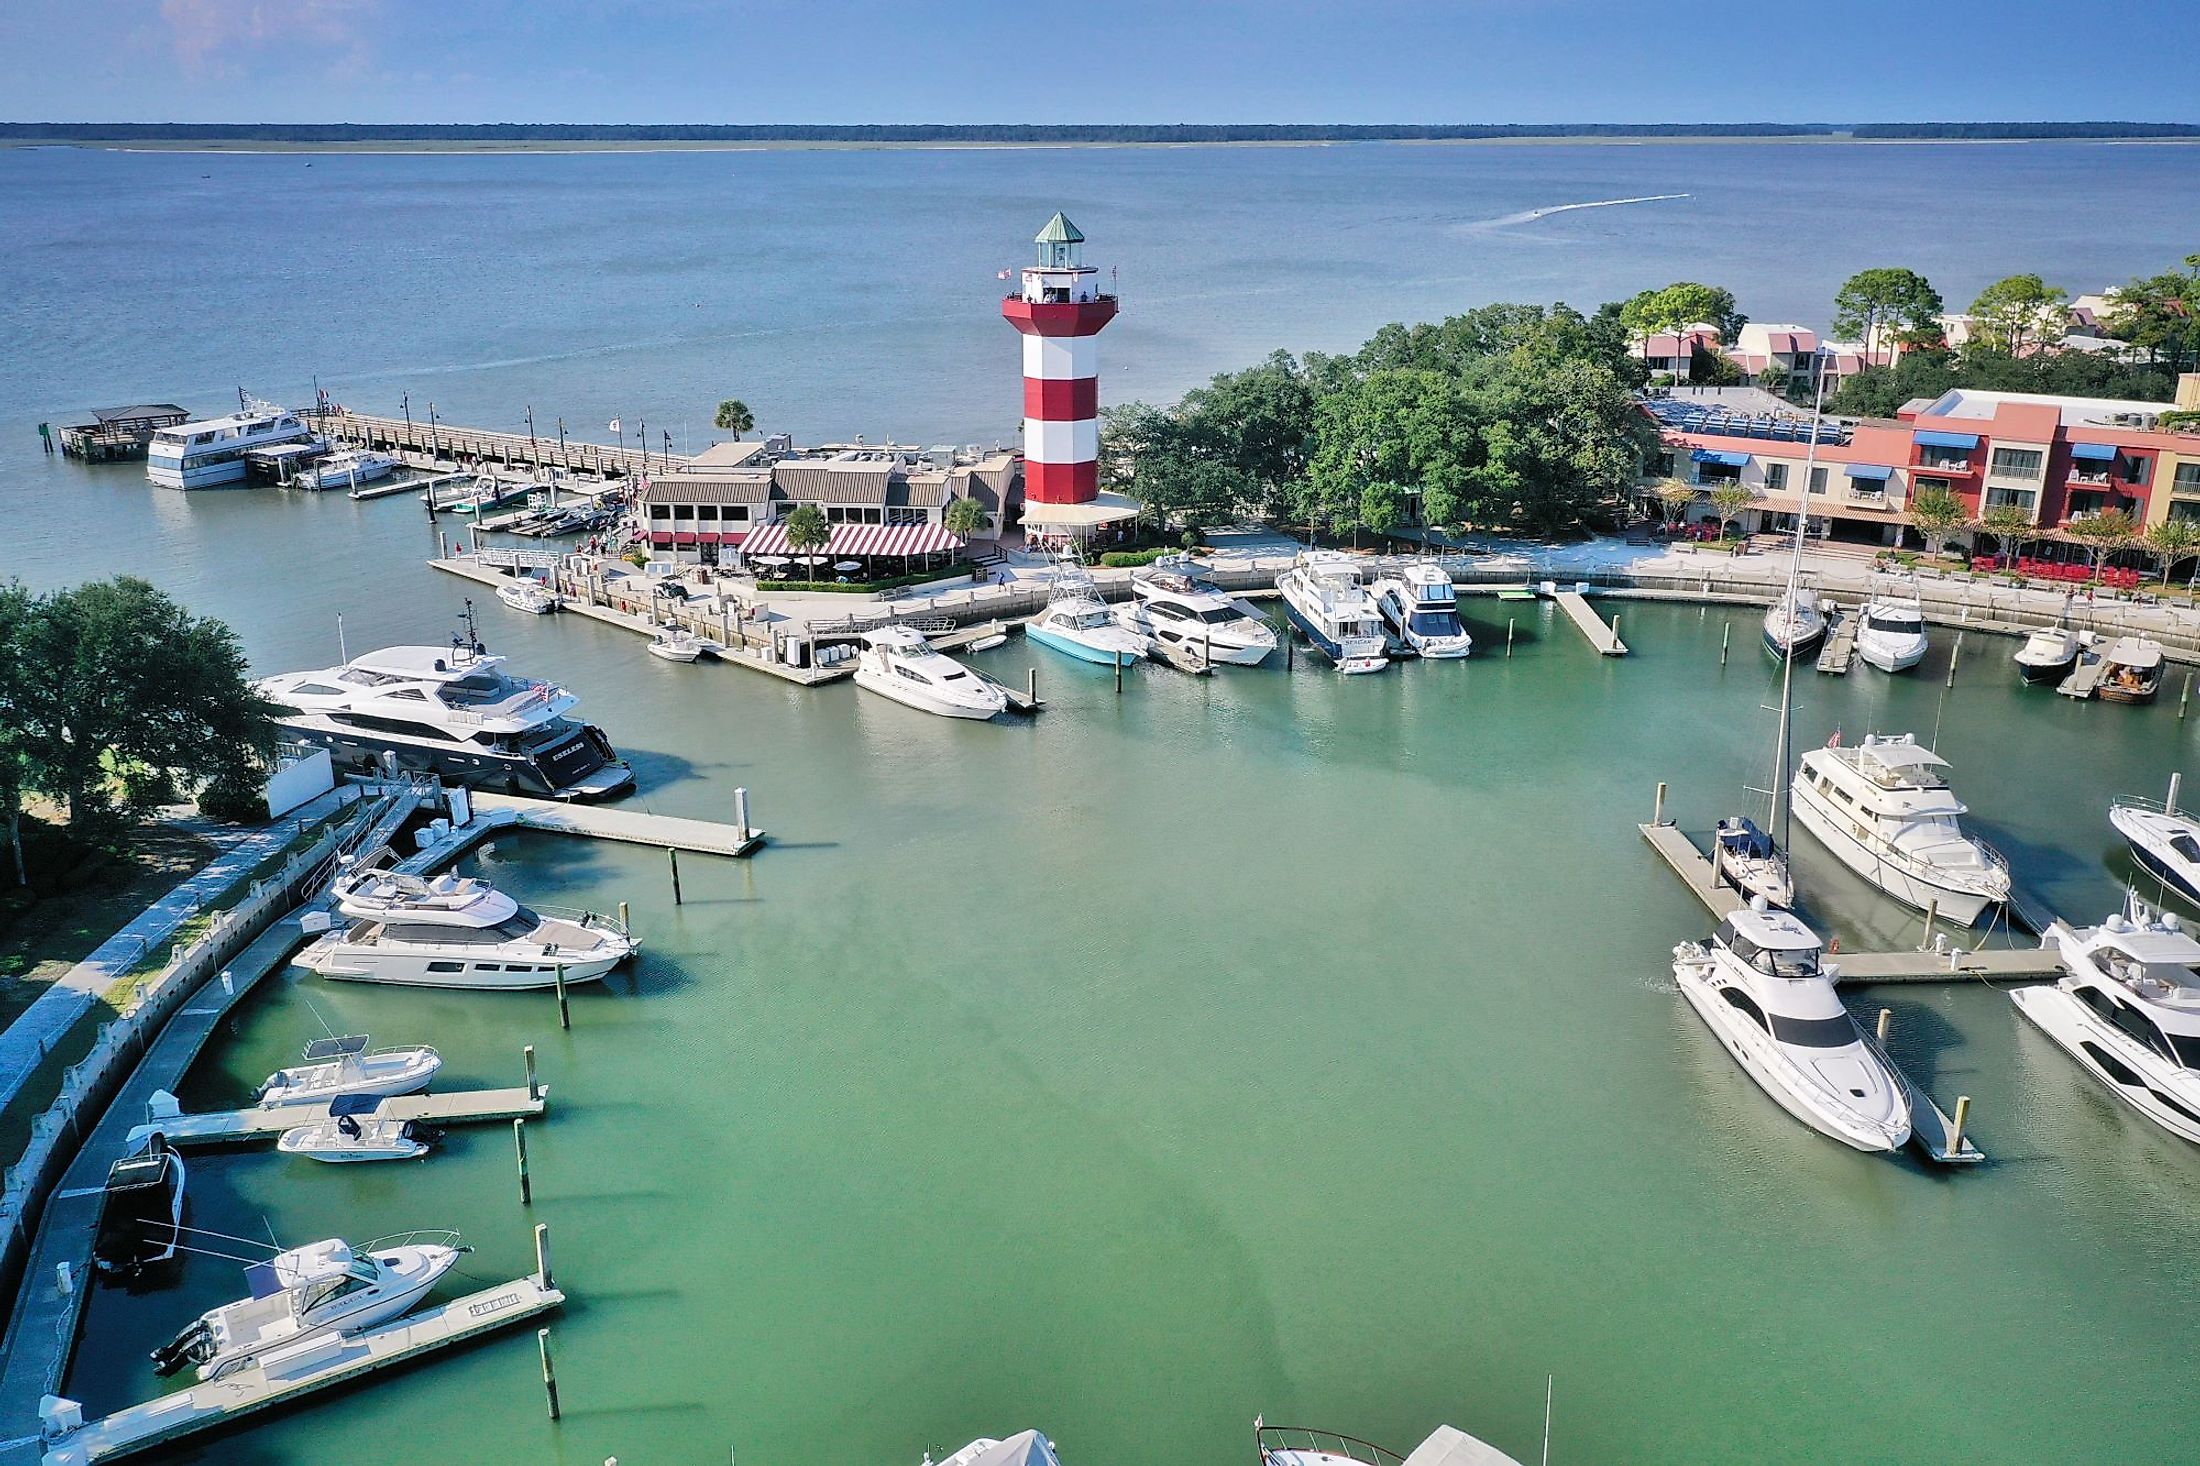 Aerial view of boats moored in the marina and a lighthouse on the pier in Harbor Town, Hilton Head Island, South Carolina. Editorial credit: Helioscribe / Shutterstock.com